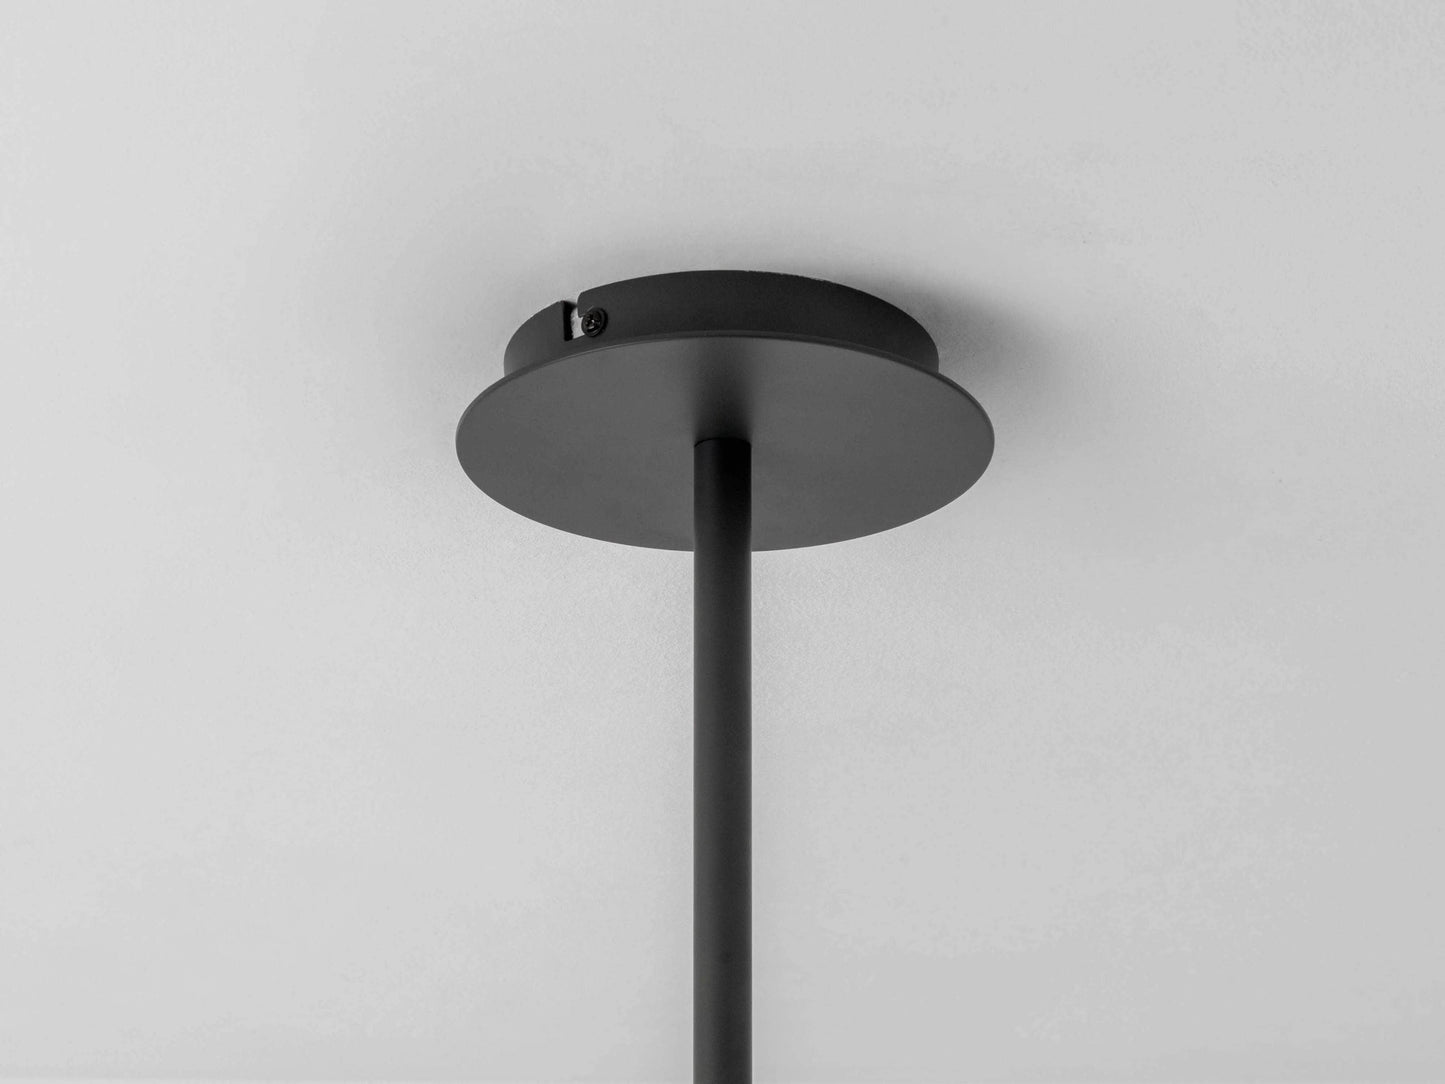 Charcoal grey ribbed glass ceiling light